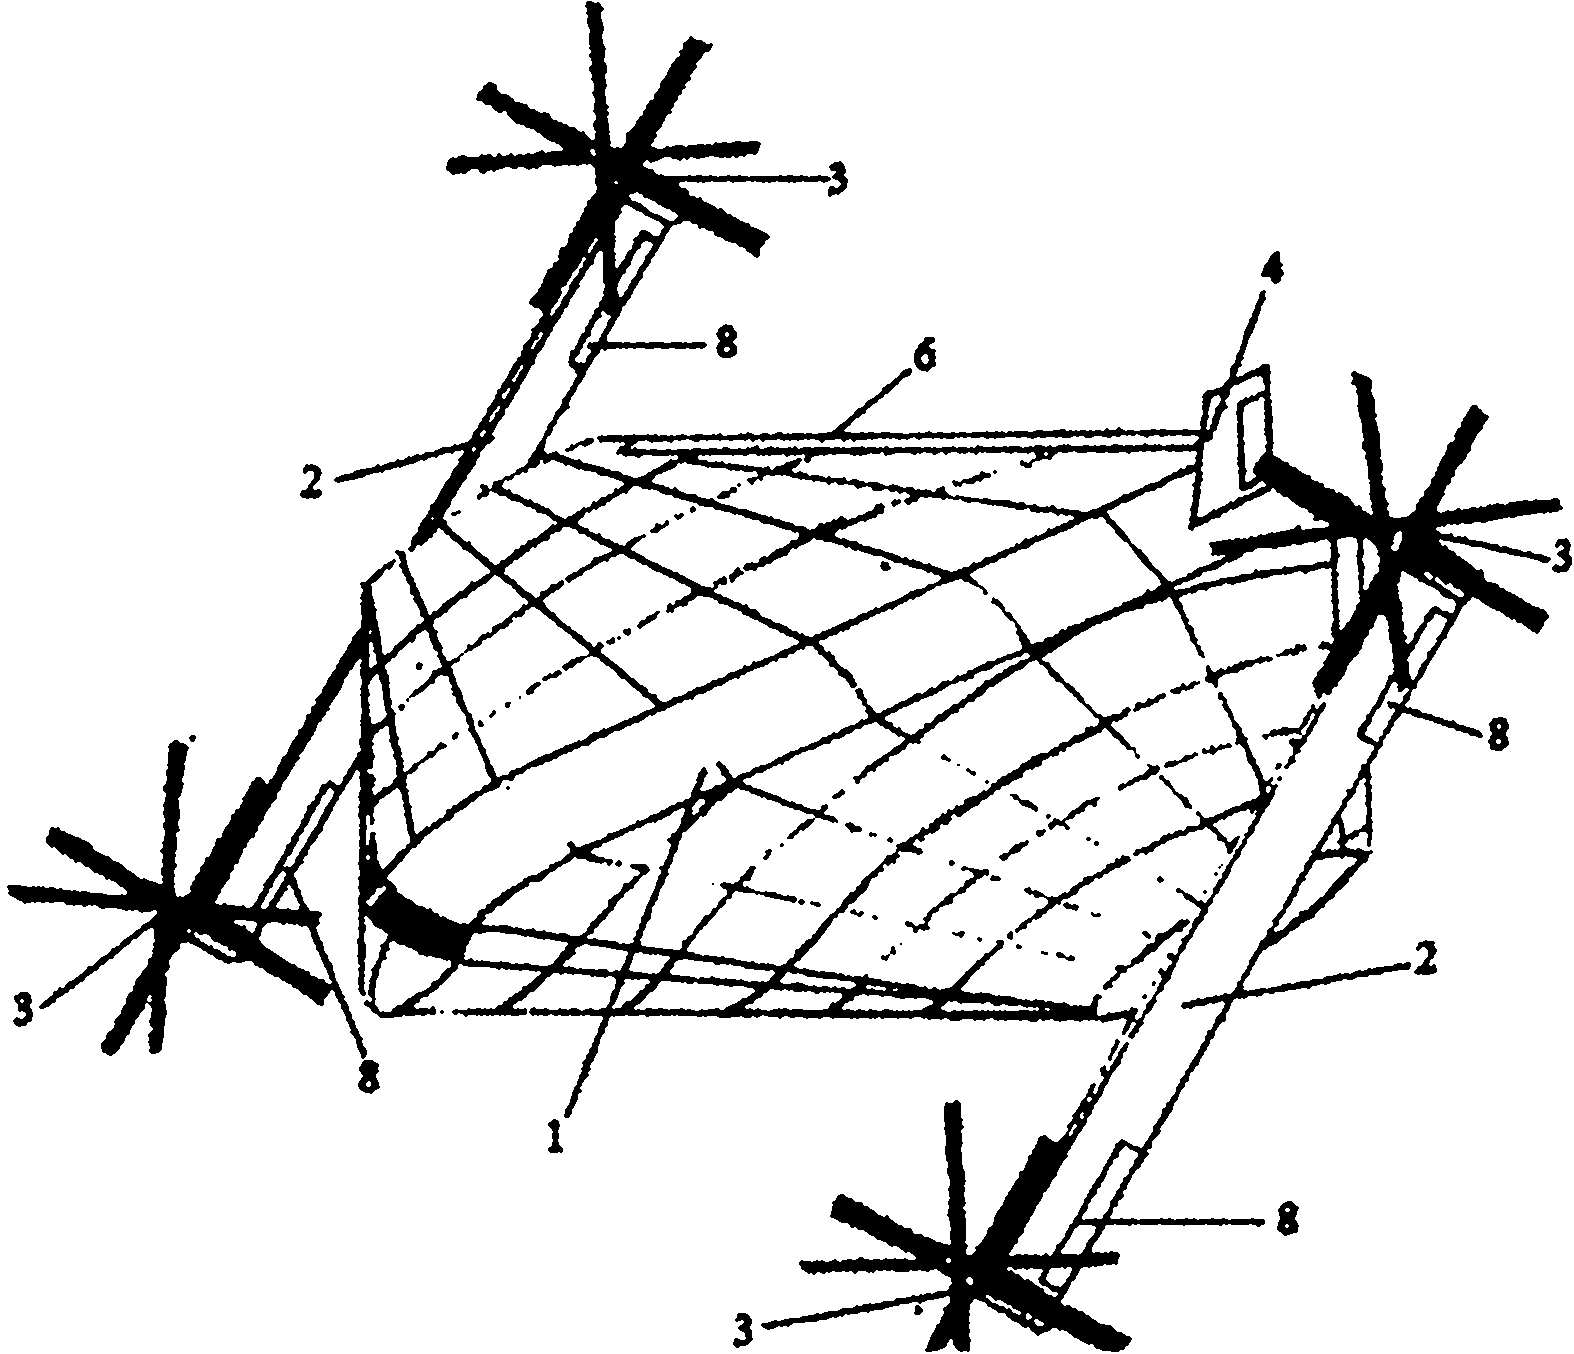 Structure of vertical take-off and landing rotor aircraft